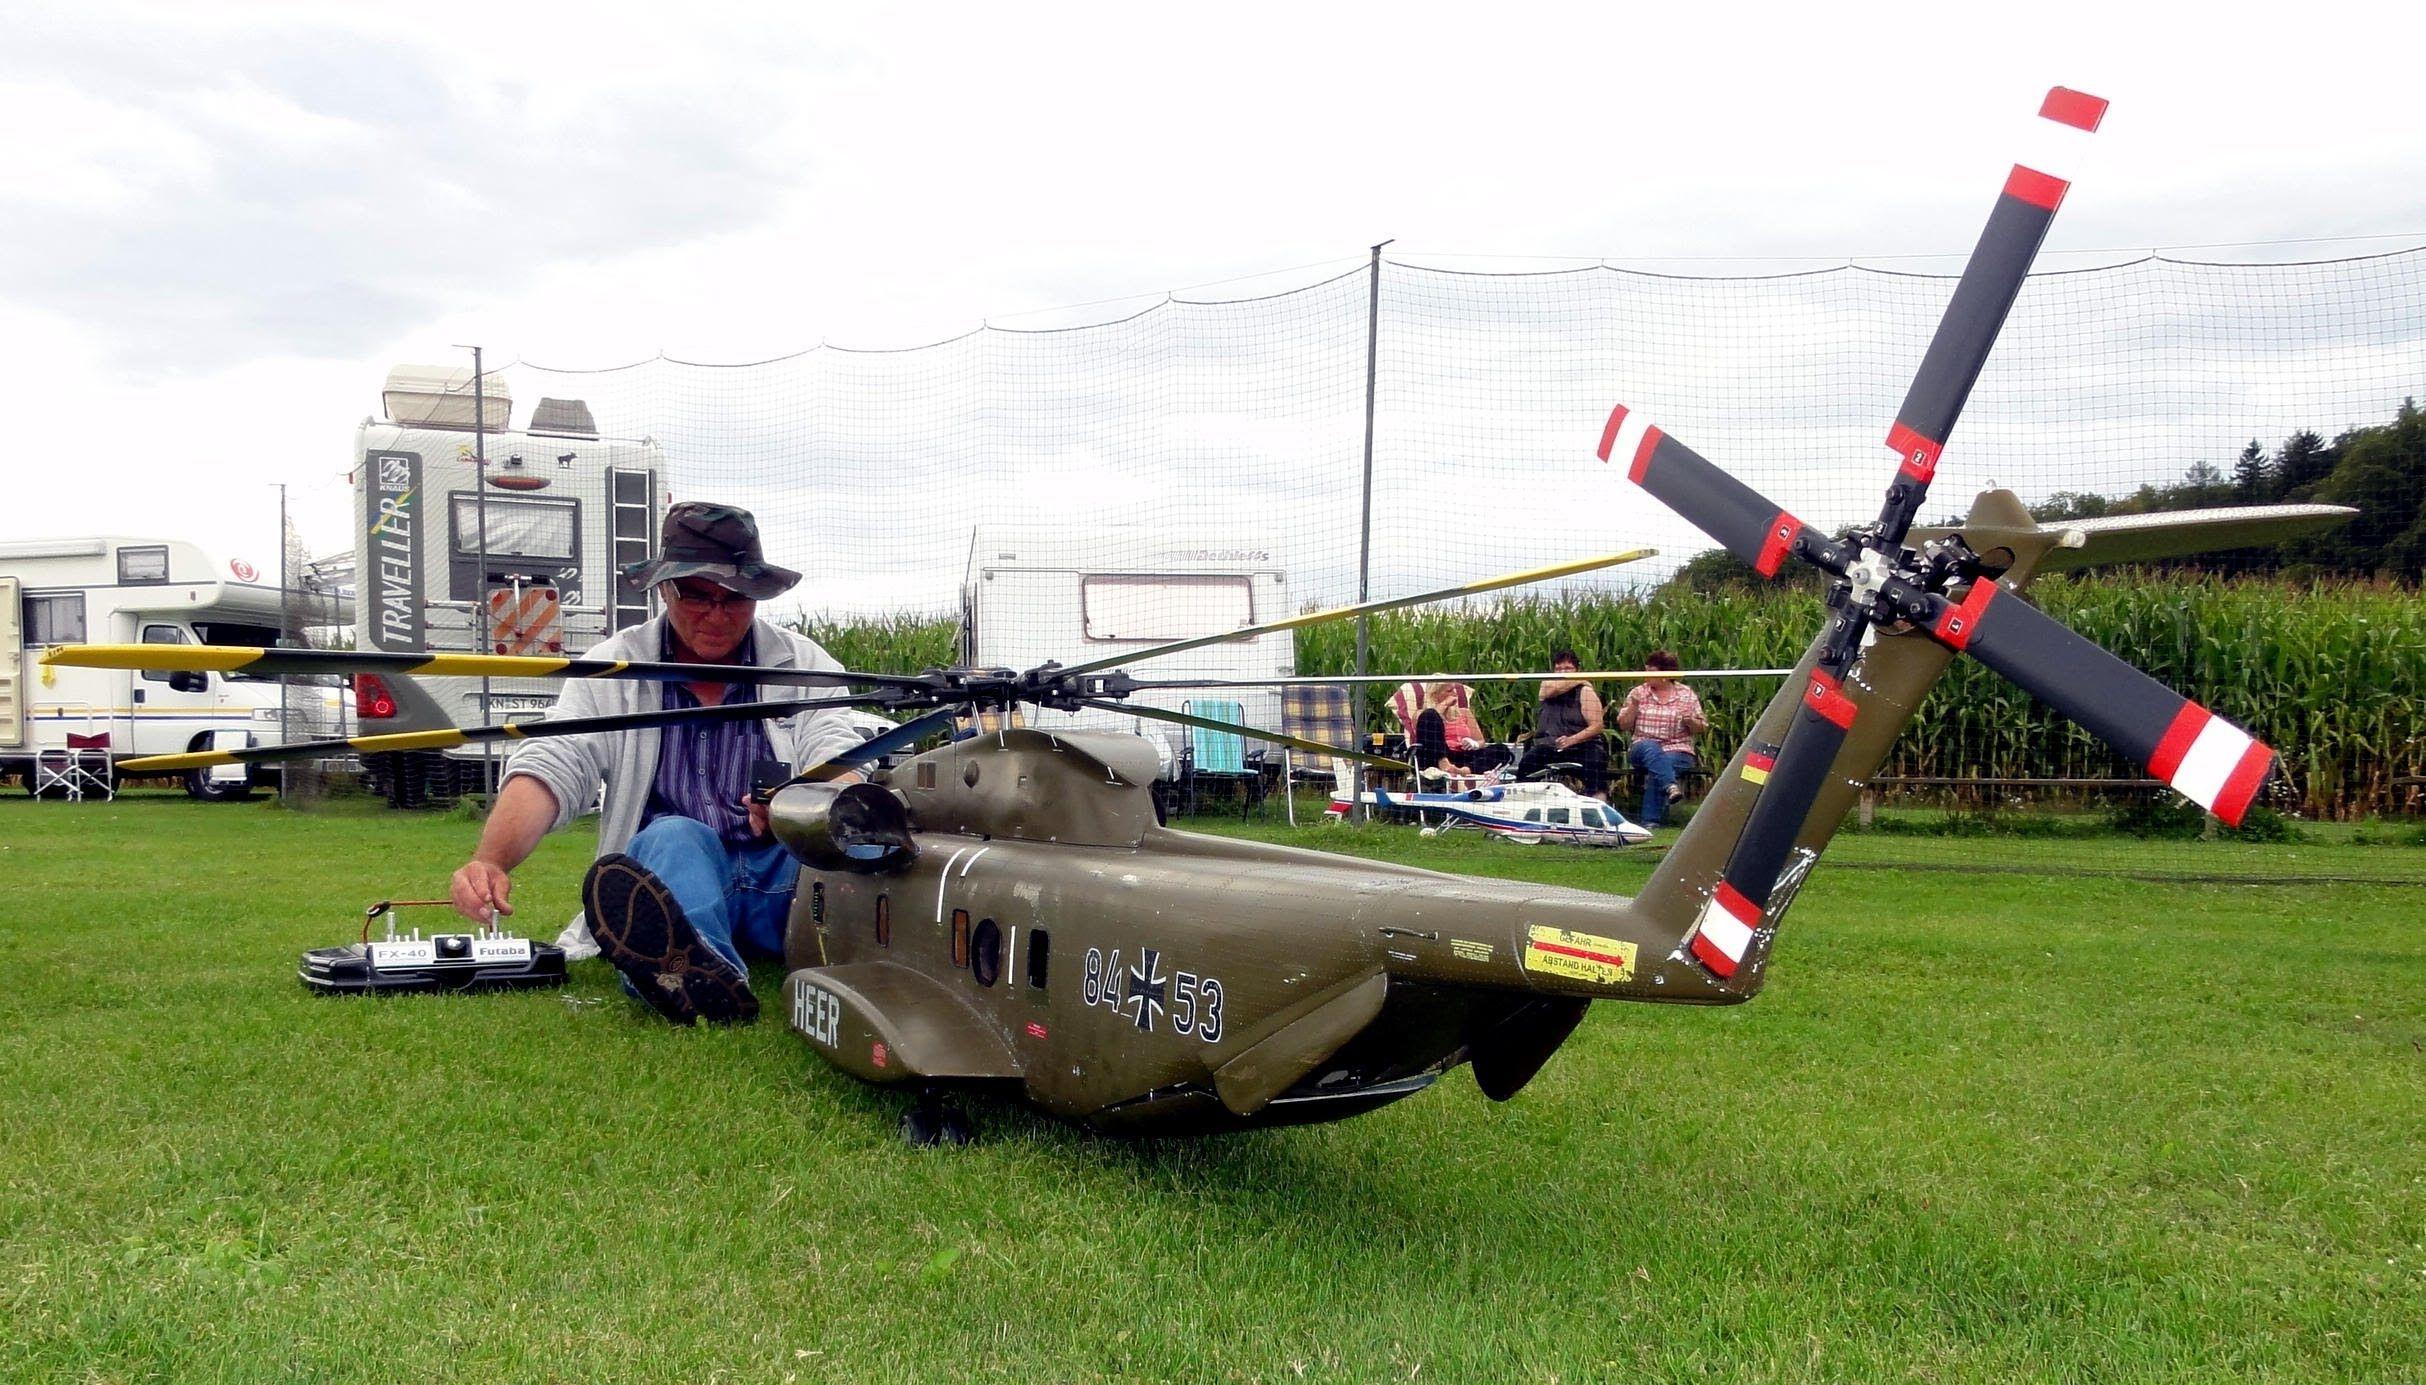 Giant Rc Helicopter For Sale: Finding the Best Deals on Giant RC Helicopters